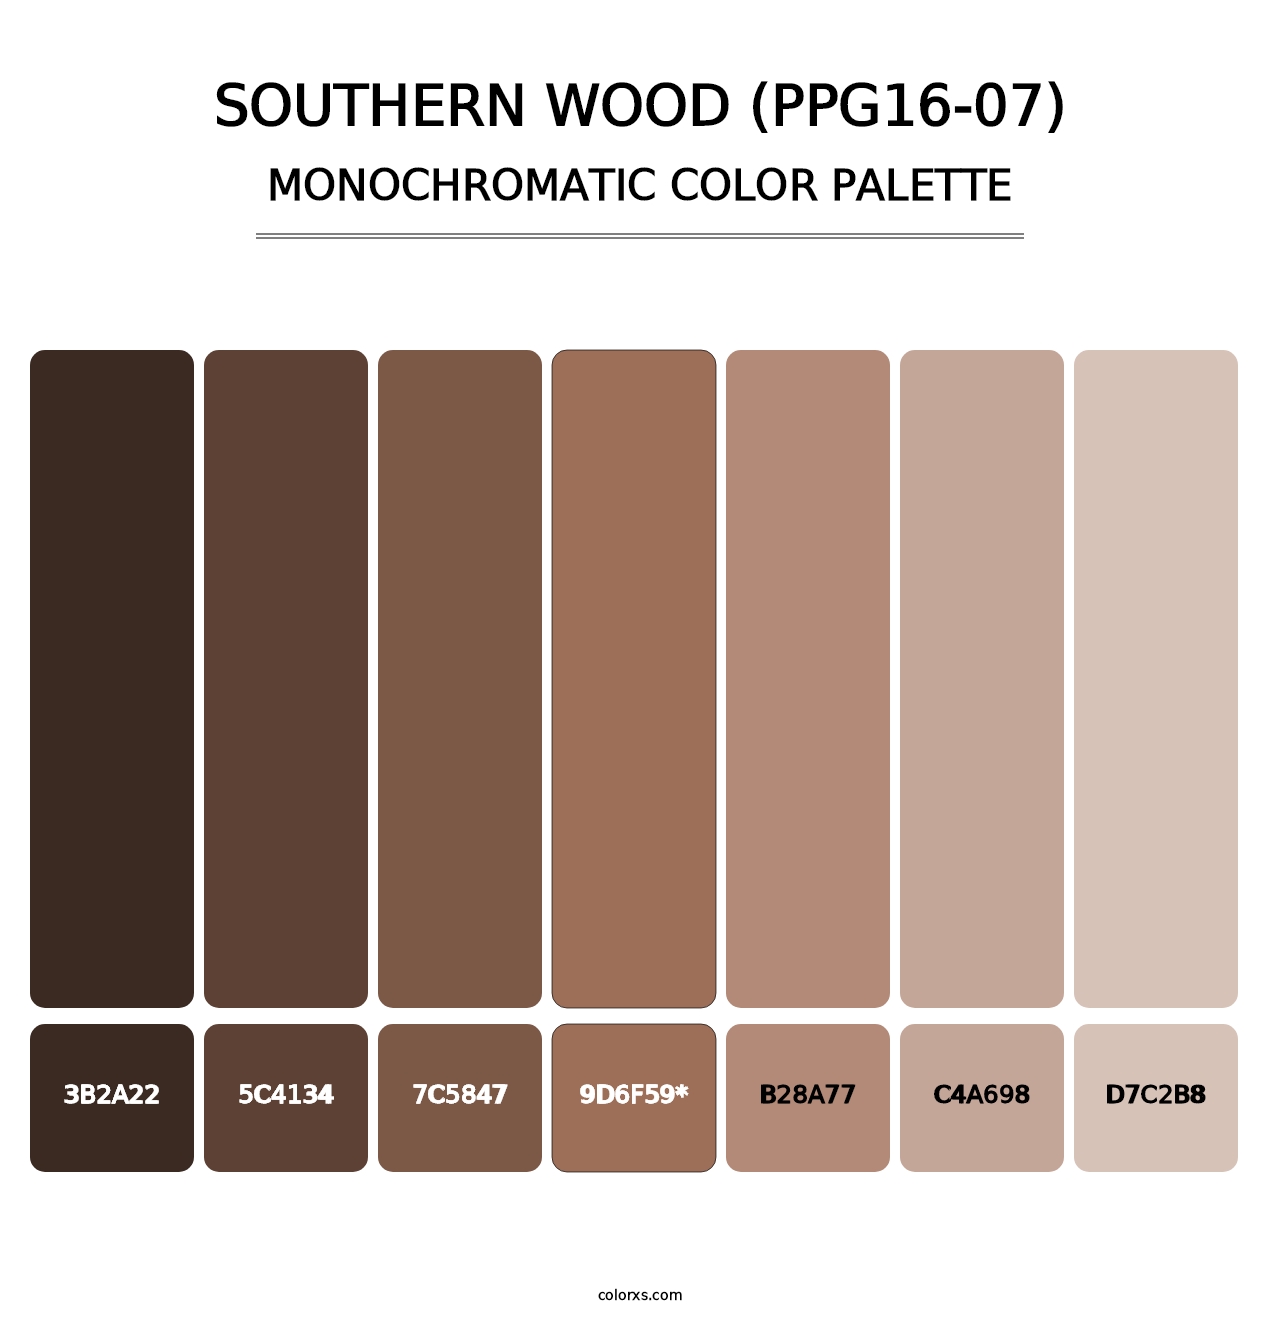 Southern Wood (PPG16-07) - Monochromatic Color Palette